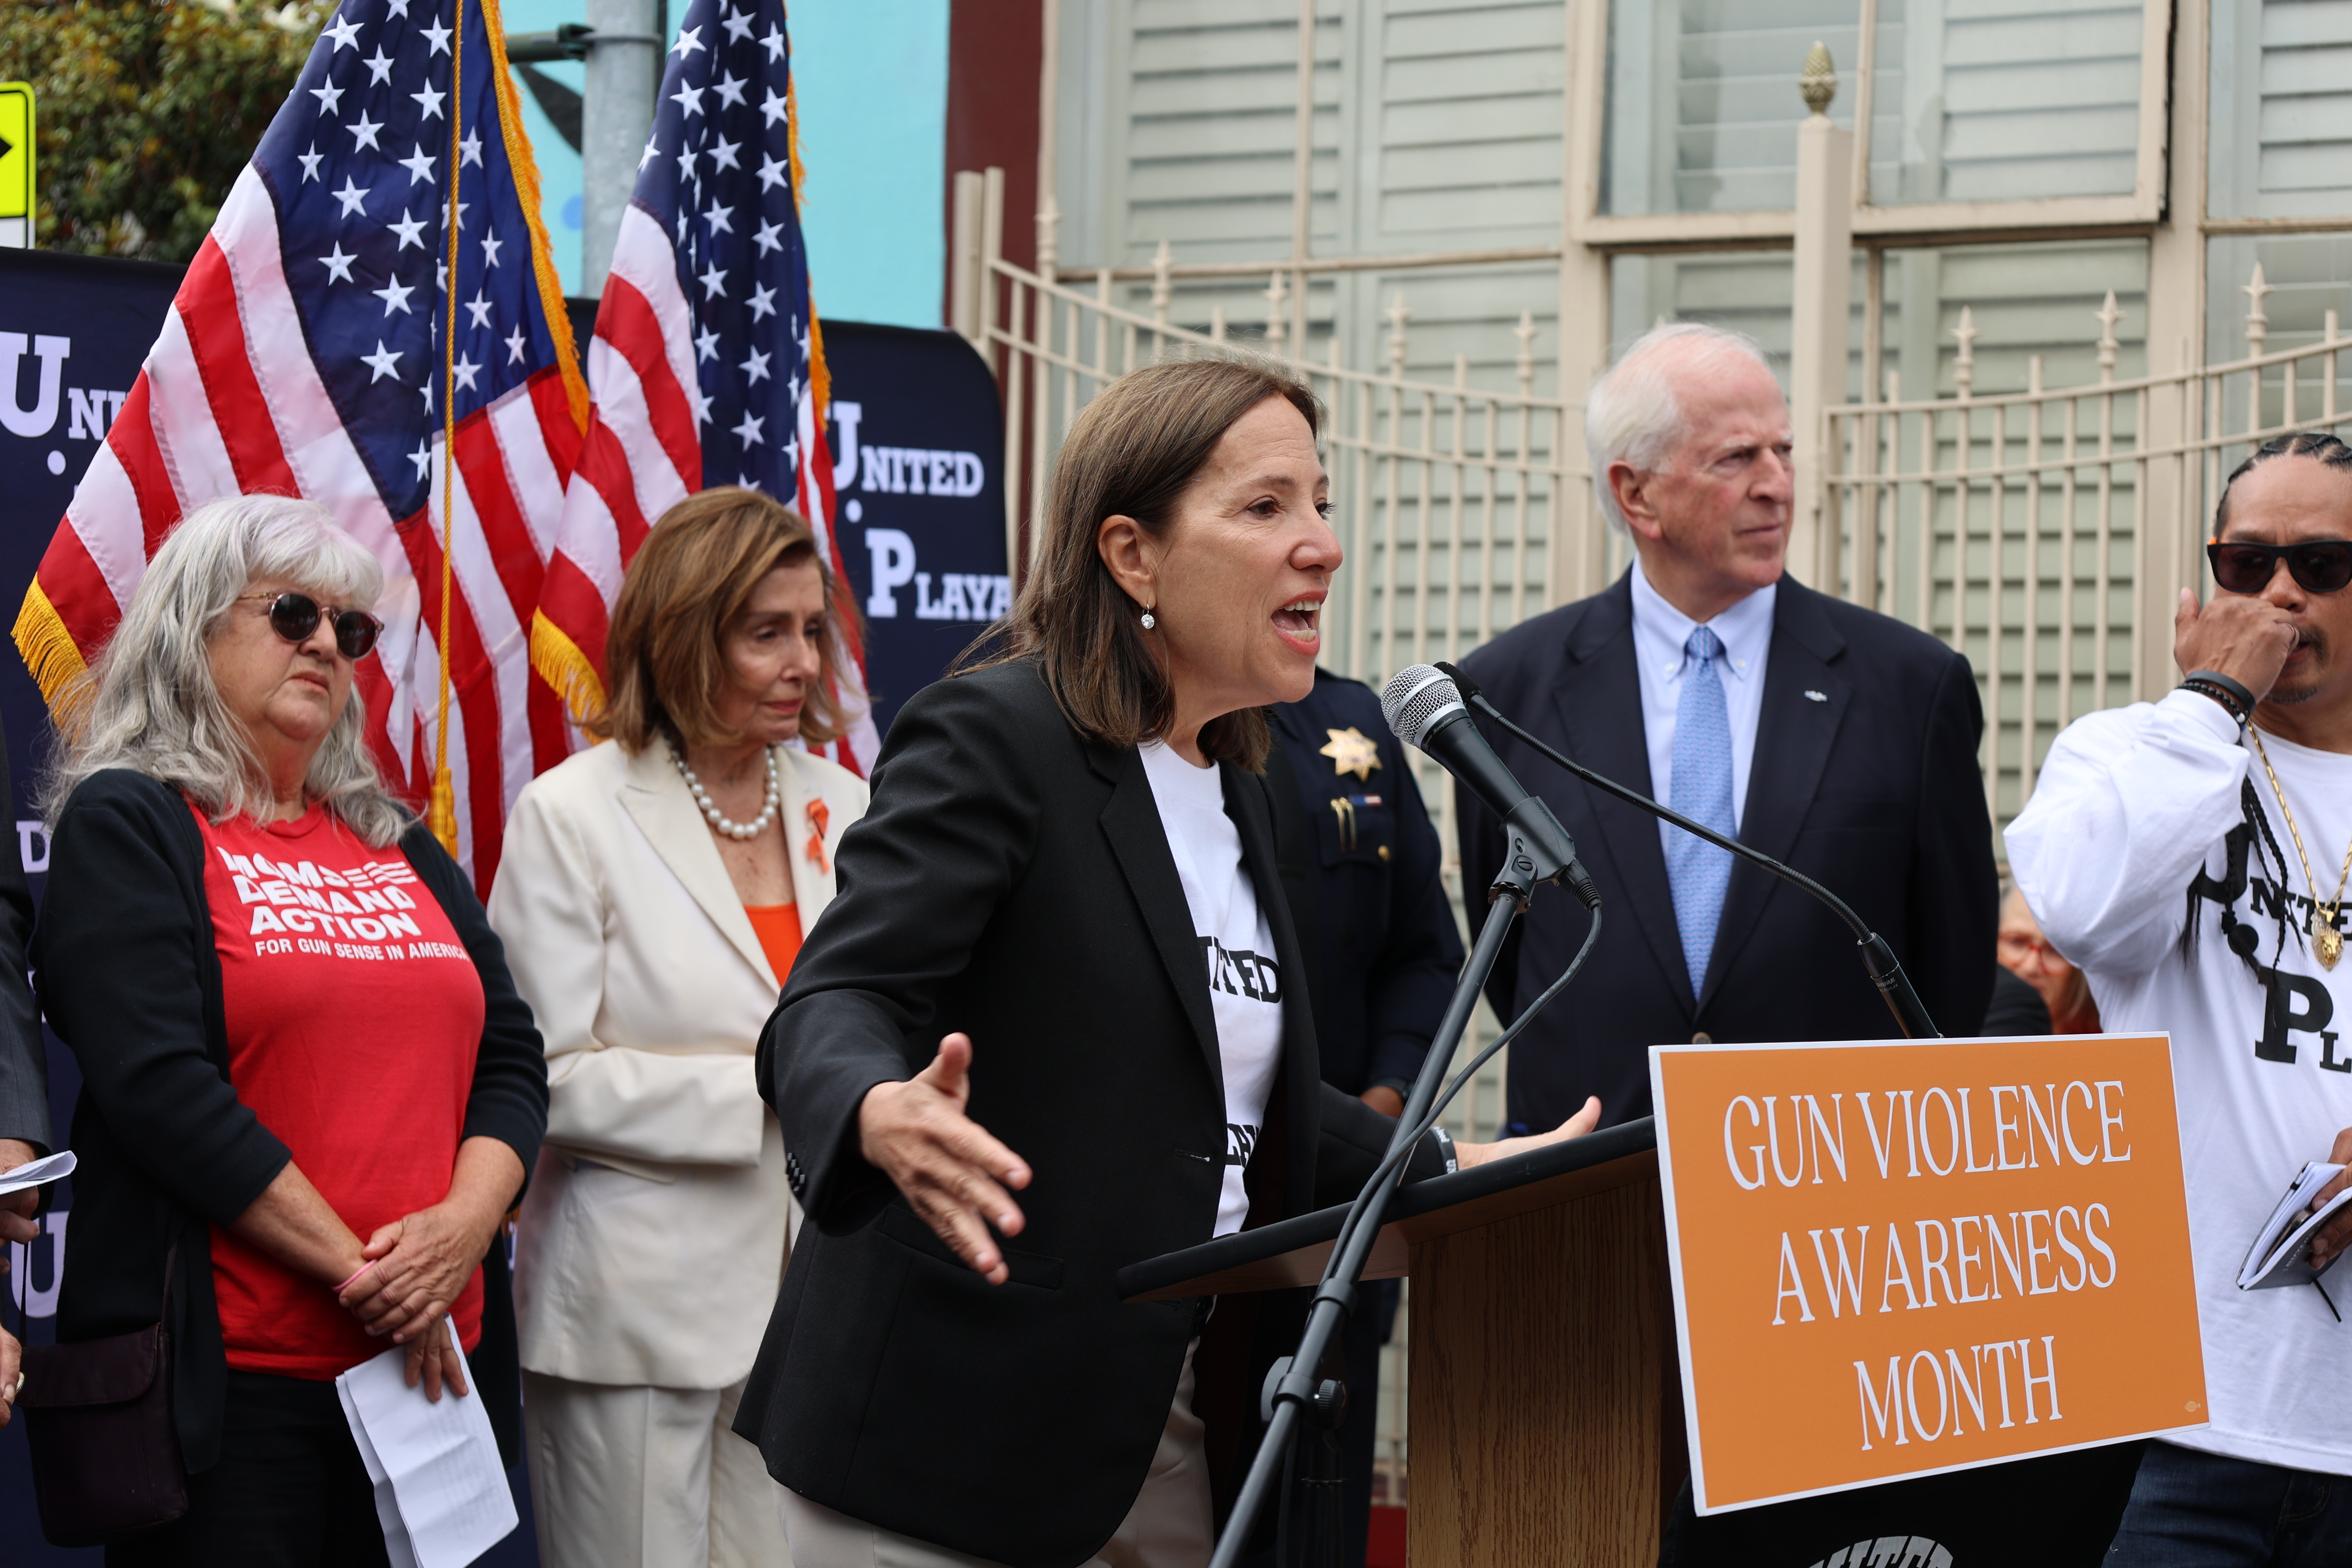 Image of Lt. Governor Kounalakis at press conference hosted by the United Playaz and Congressman Mike Thompson